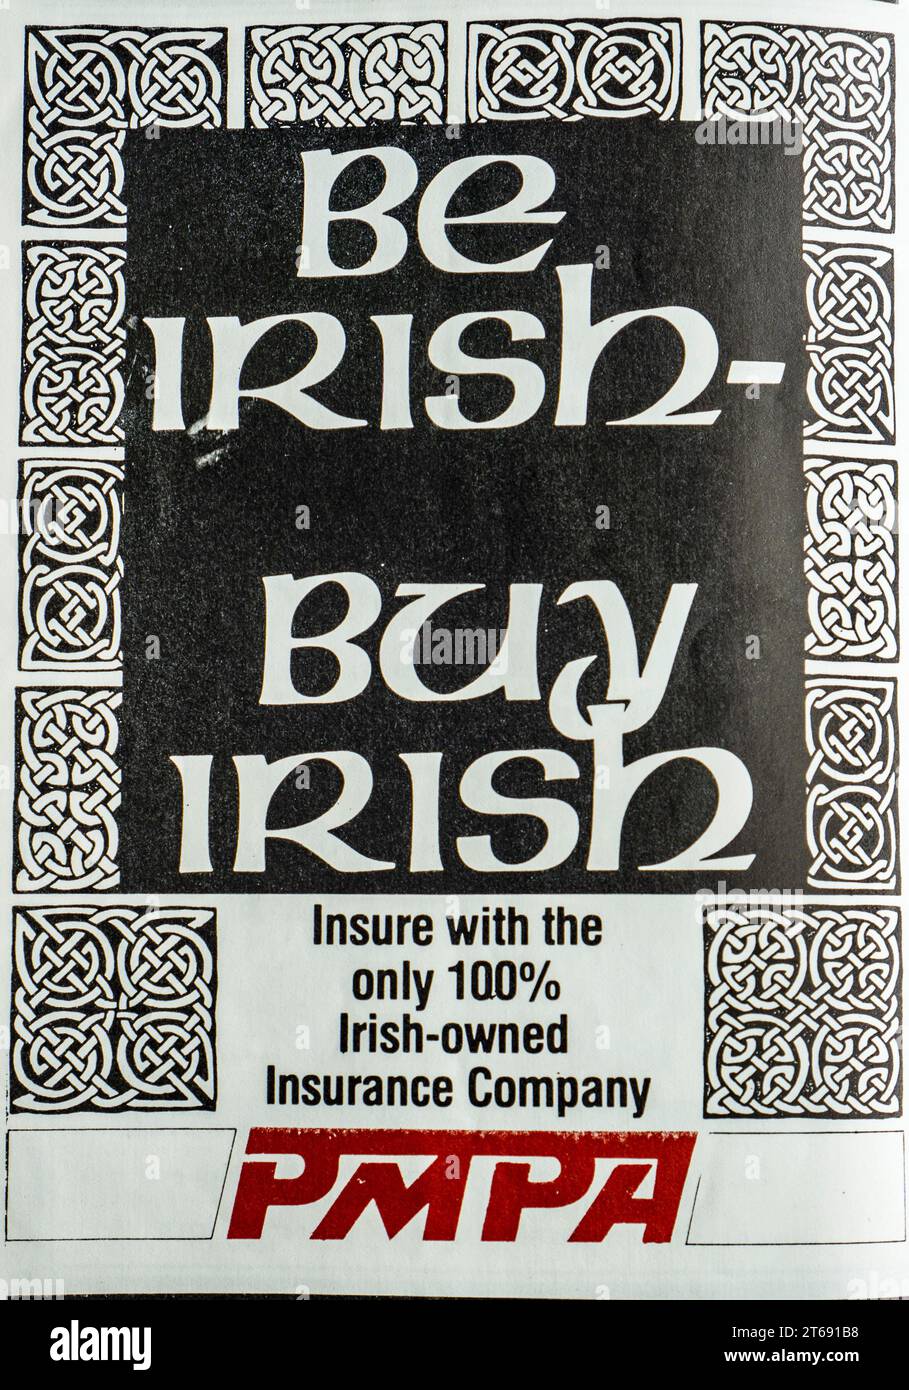 A 1983  advertisement for PMPA Insurance once the largest car insurance company in Ireland. In 1983 the company was placed into administration  and saved from collapse by government intervention. To cover the losses incurred by PMPA a 1% levy was imposed on all insurance policies to cover the shortfall. The company remained in administration until 2013.The company was eventually acquired by AXA. Stock Photo